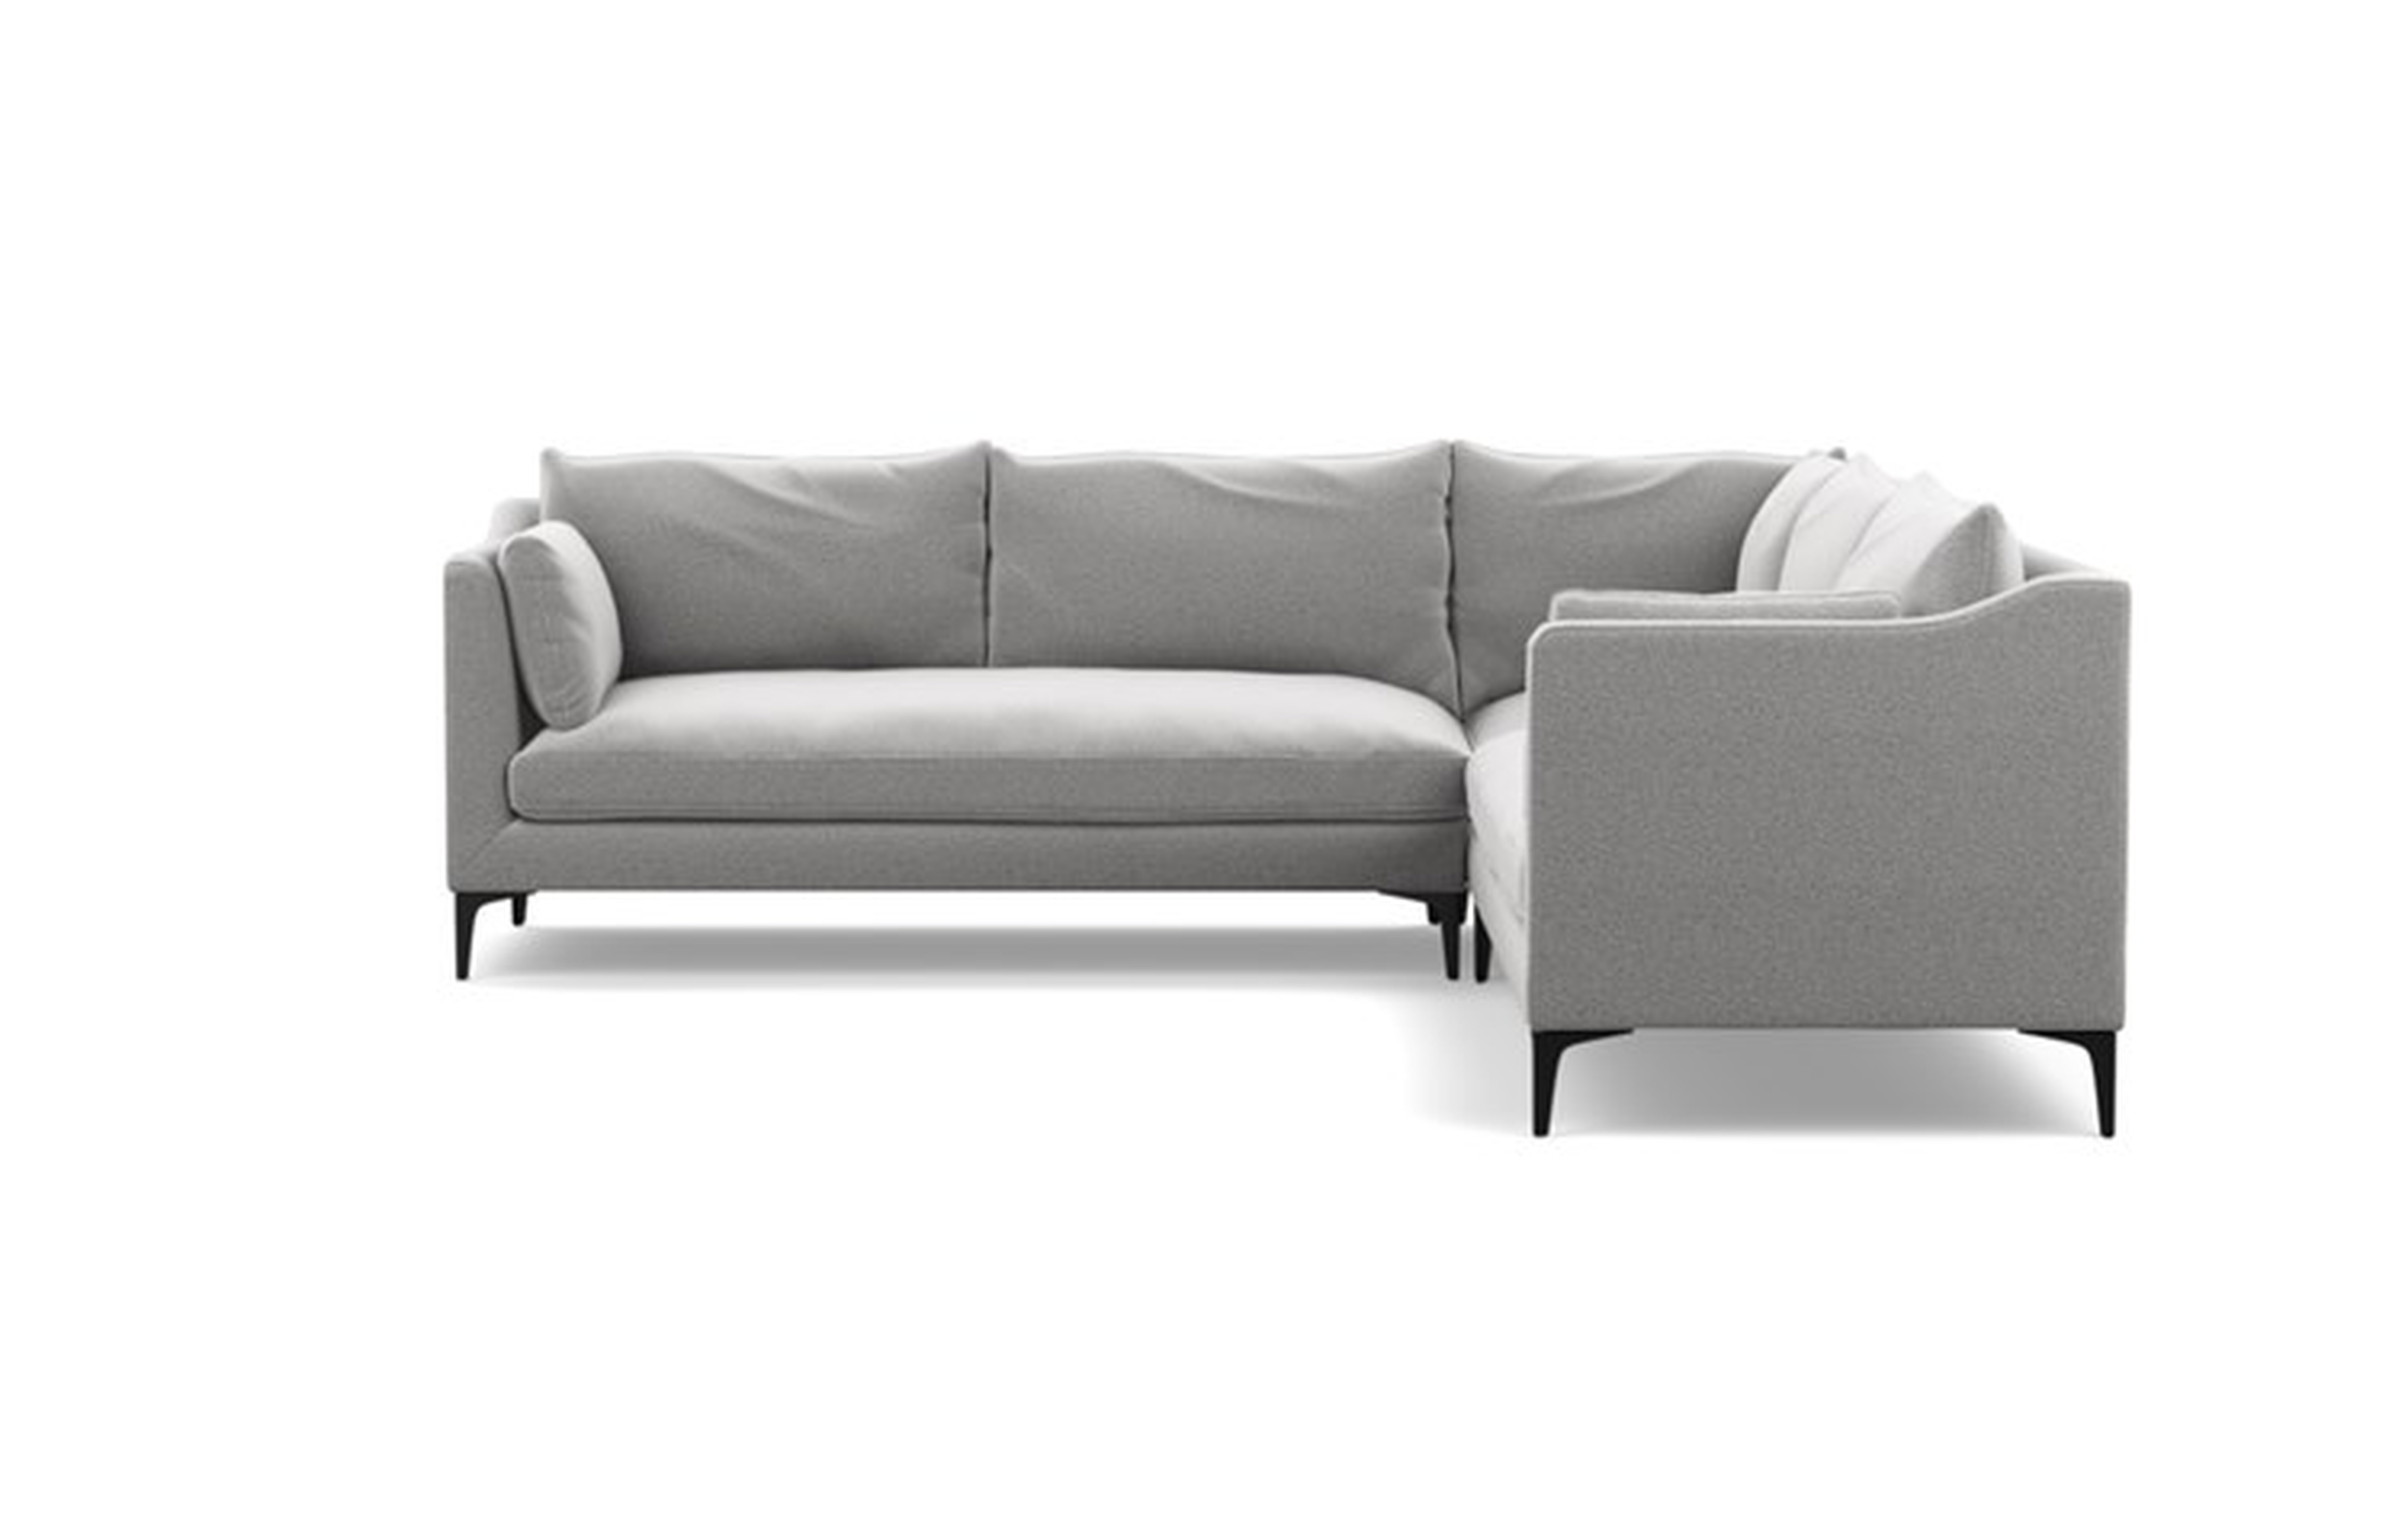 CAITLIN BY THE EVERYGIRL Corner Sectional Sofa in Ash Performance Felt with Matte Black Sloan L Leg - Interior Define